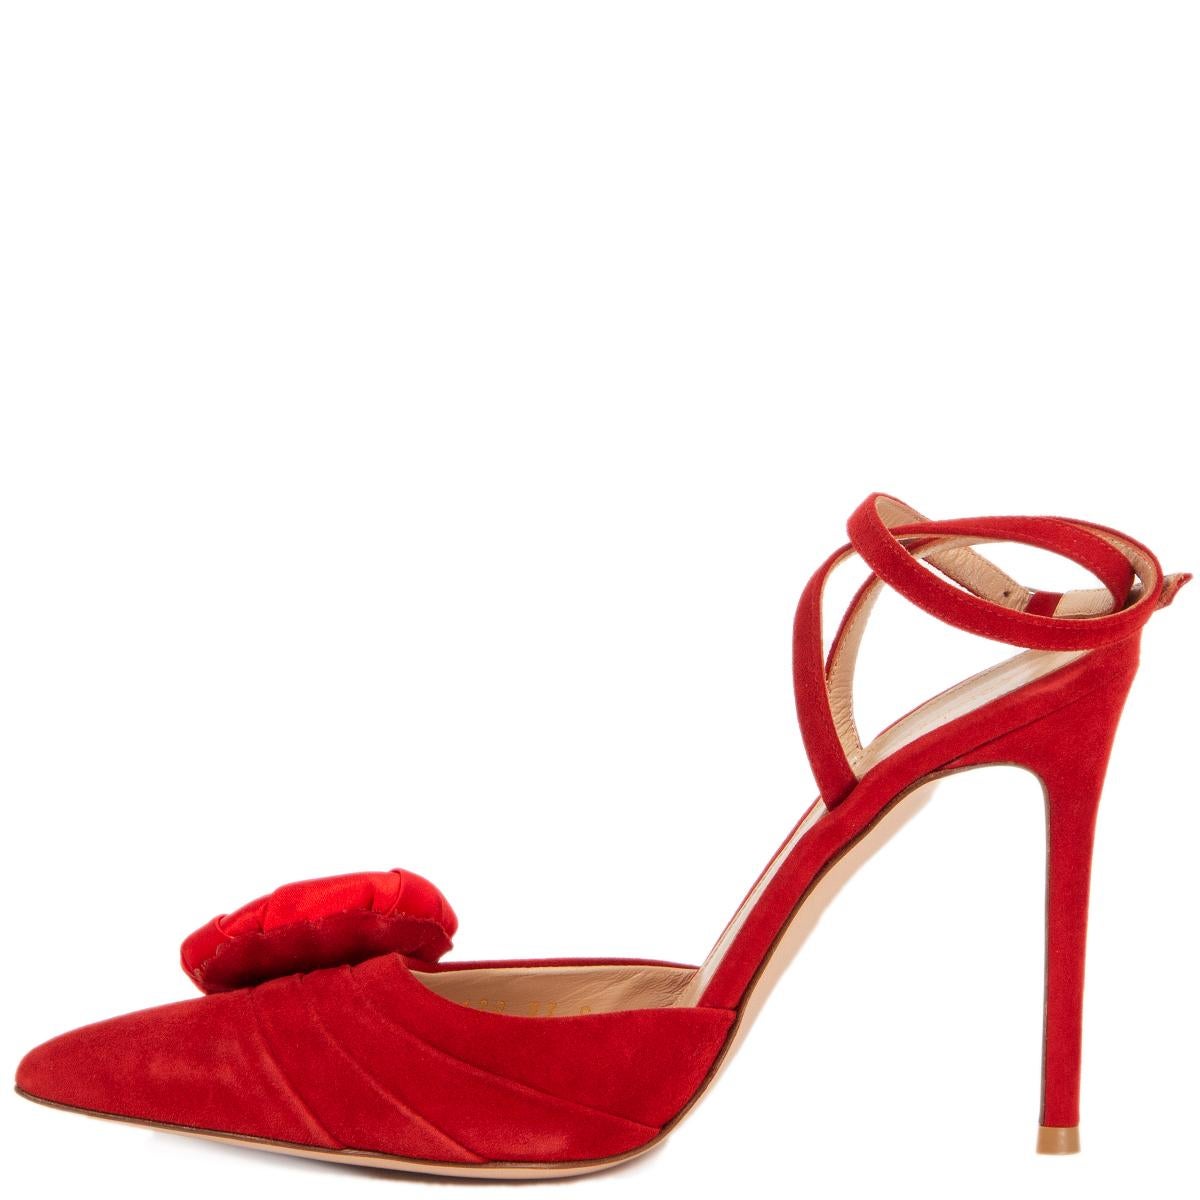 Red GIANVITO ROSSI red suede SATIN ROSE ANKLE STRAP PUMPS Shoes 37 For Sale